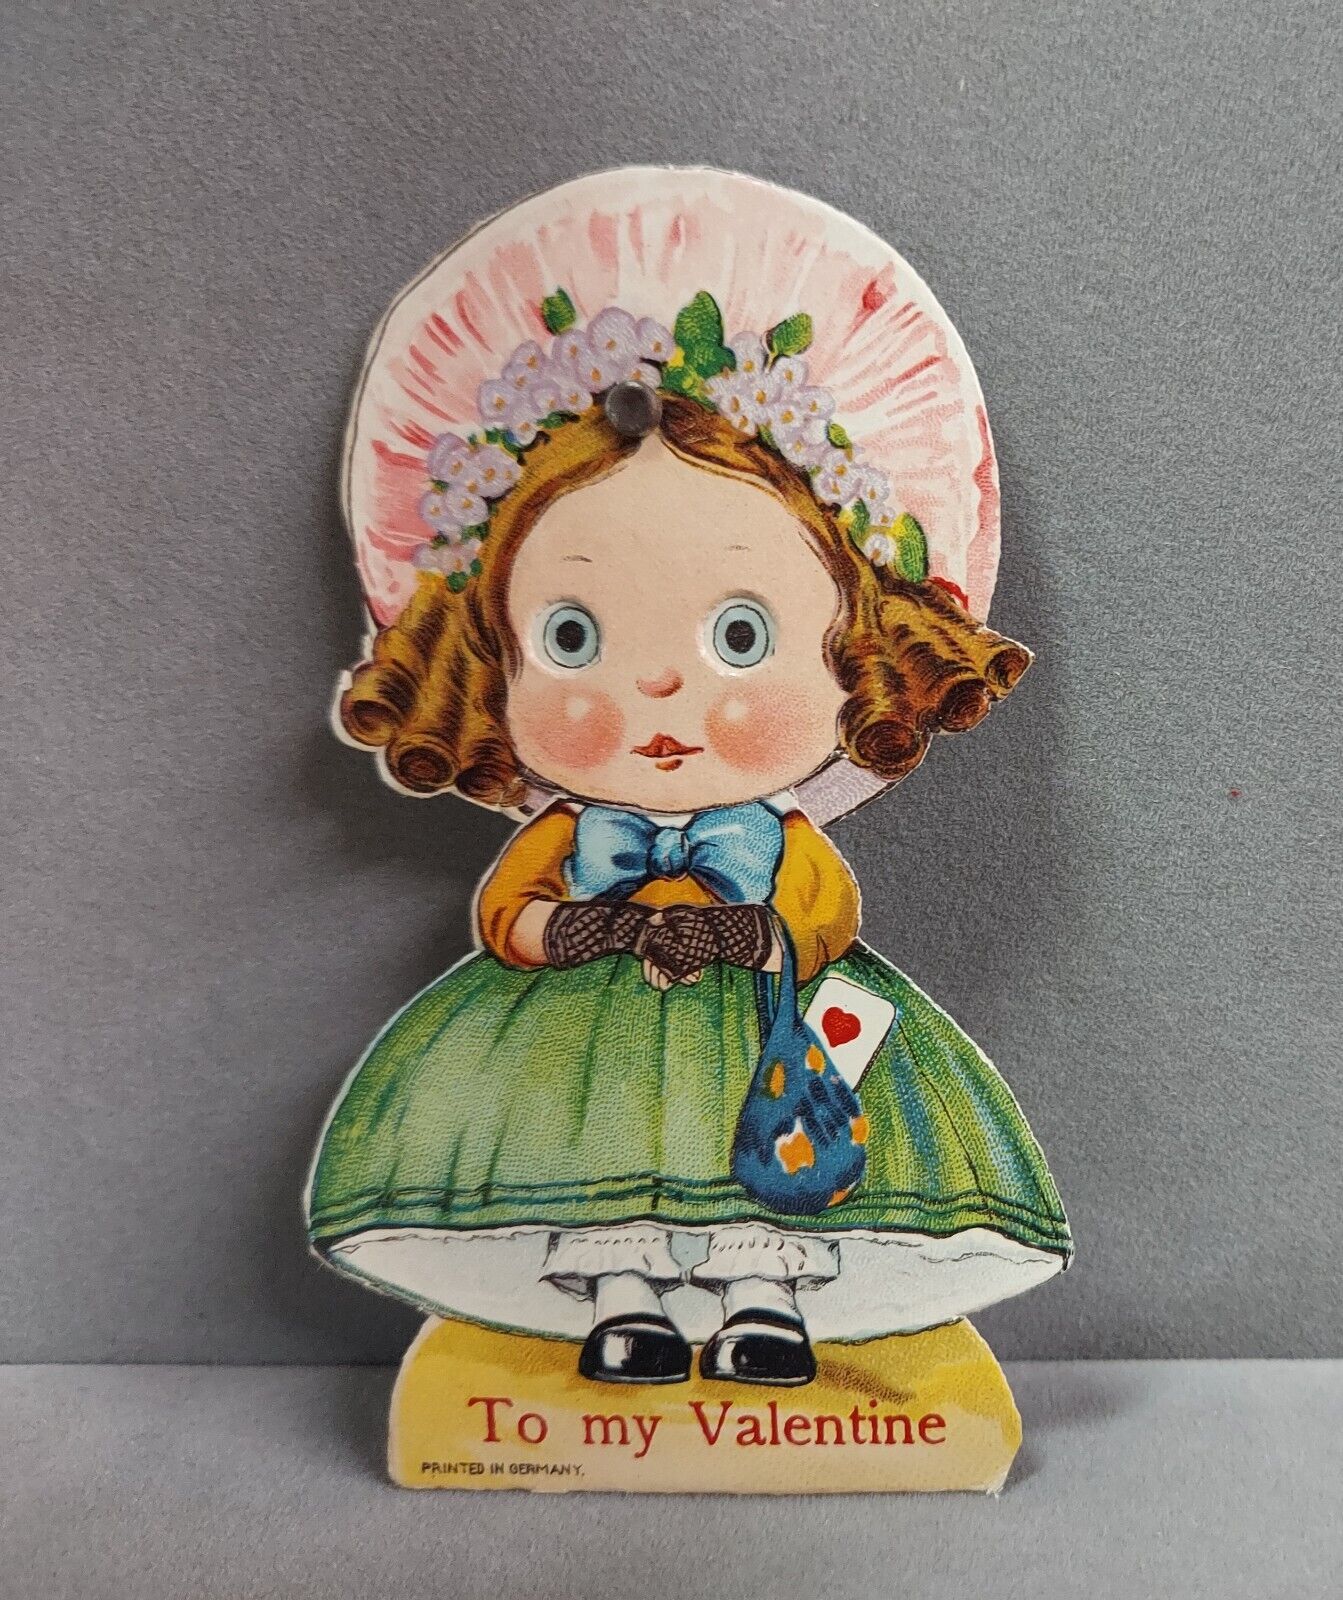 Vintage Die Cut Valentines Card 1940s Girl With Movable Head Shifting Eyes Used